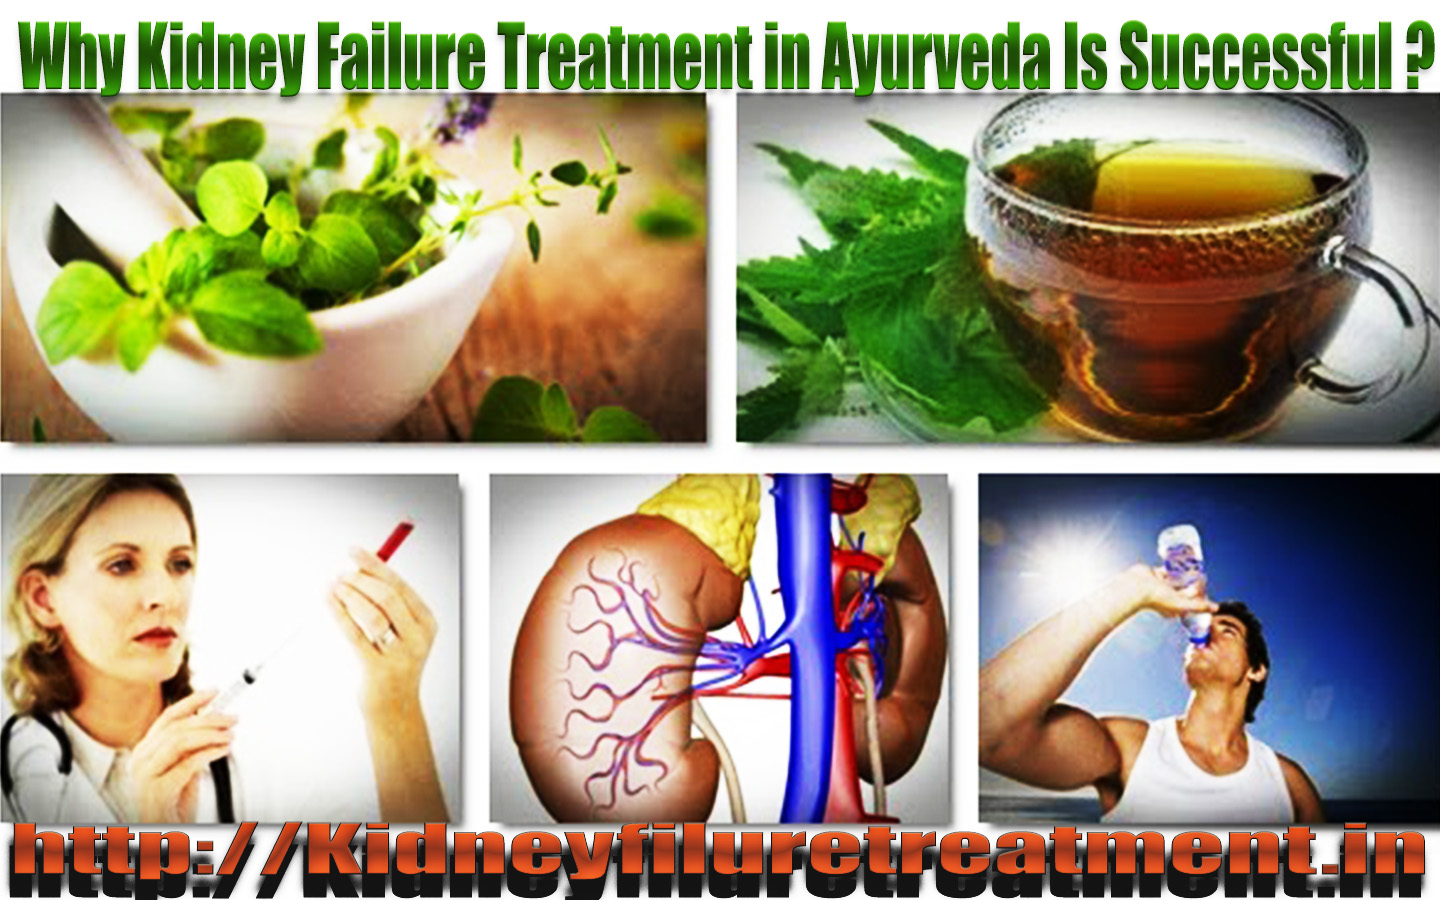 Why Kidney Failure Treatment in Ayurveda Is Successful